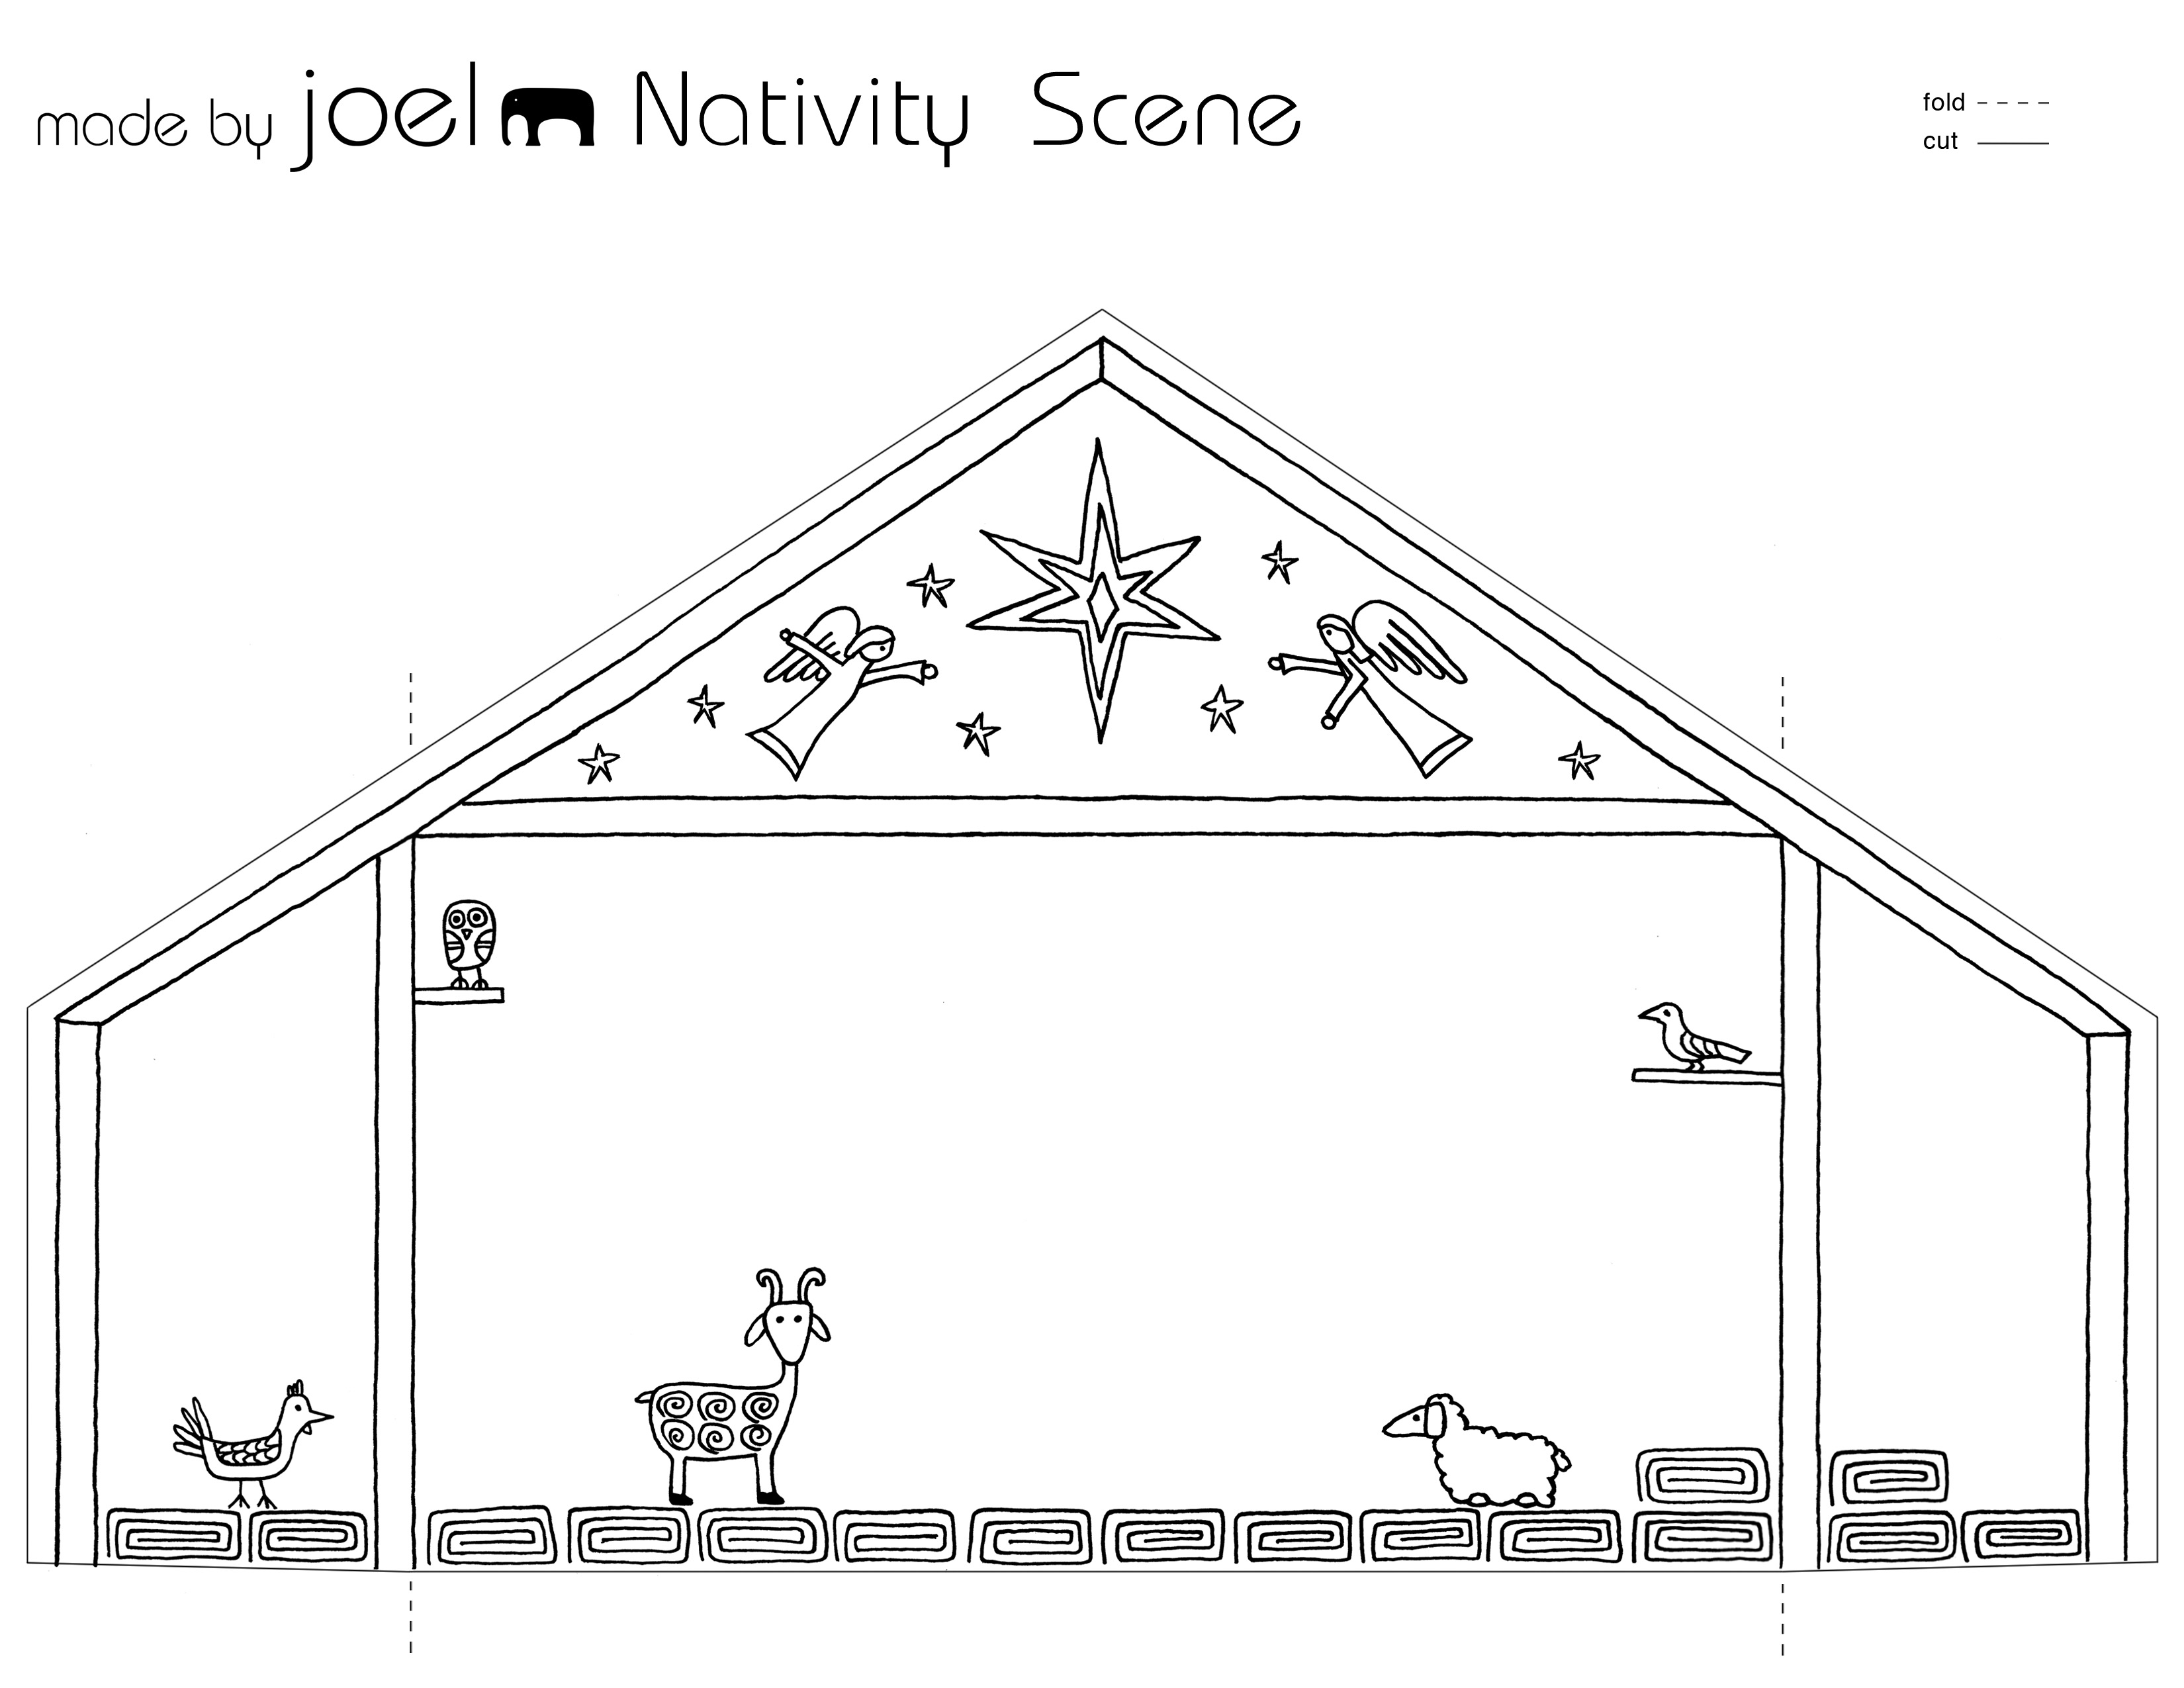 Made by Joel Paper City Nativity Scene Template Kids Craft 1 Made by Joel